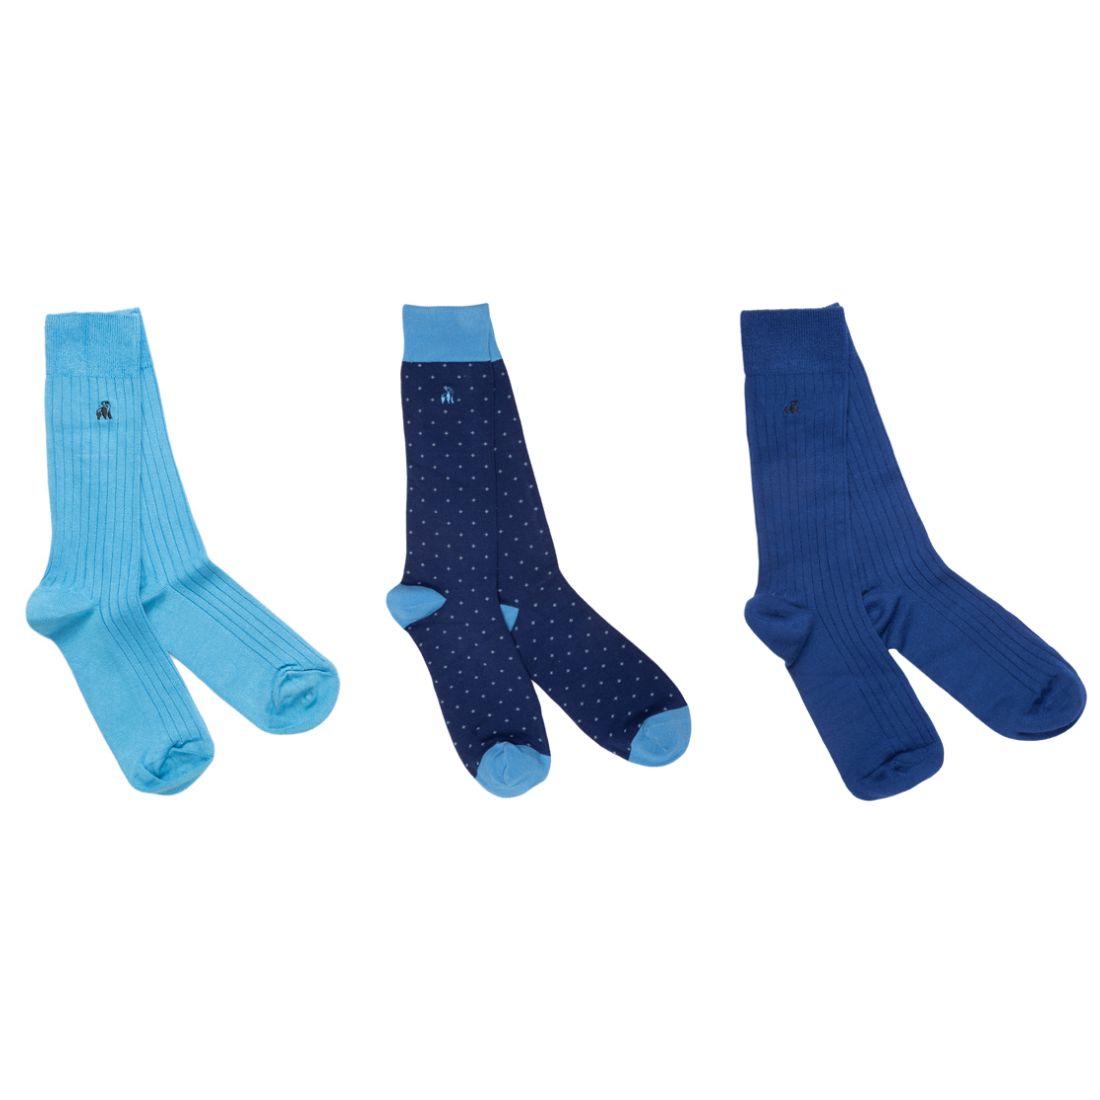 Spotted Blue Sock Box - 3 Pairs of Bamboo Socks (His)